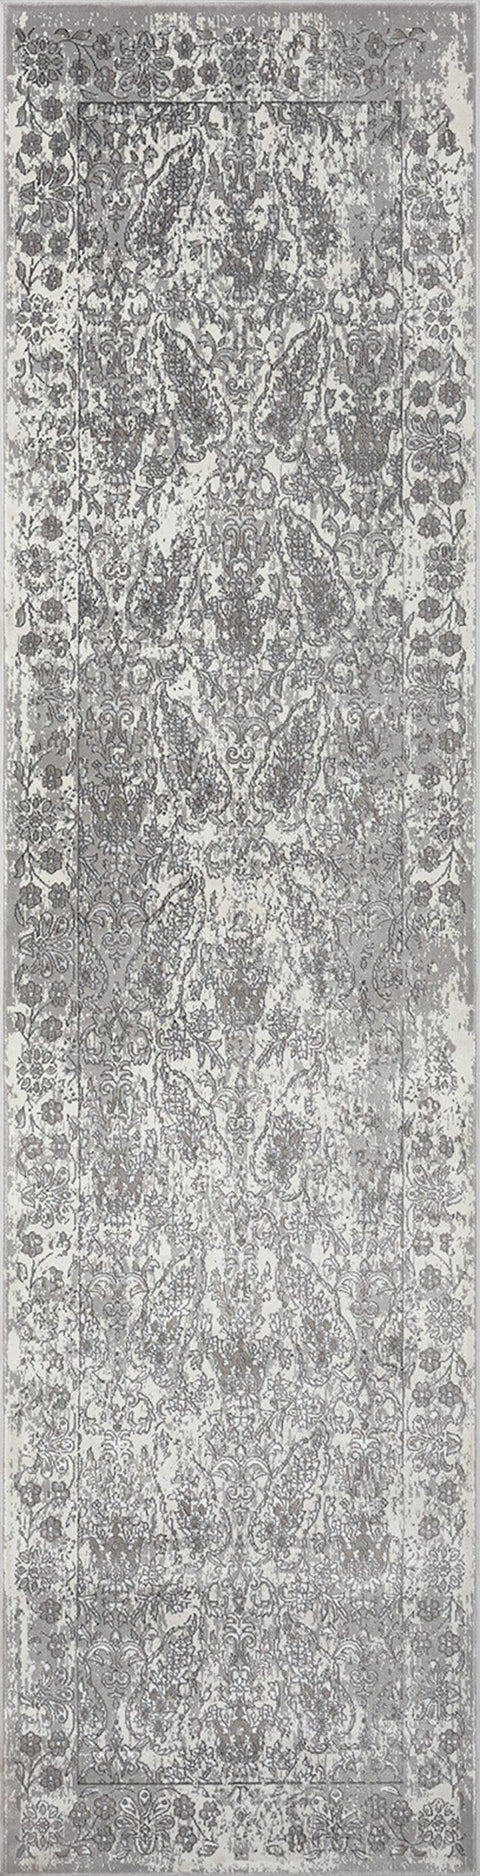 Aaerin Charcoal Grey And Ivory Traditional Distressed Runner Rug